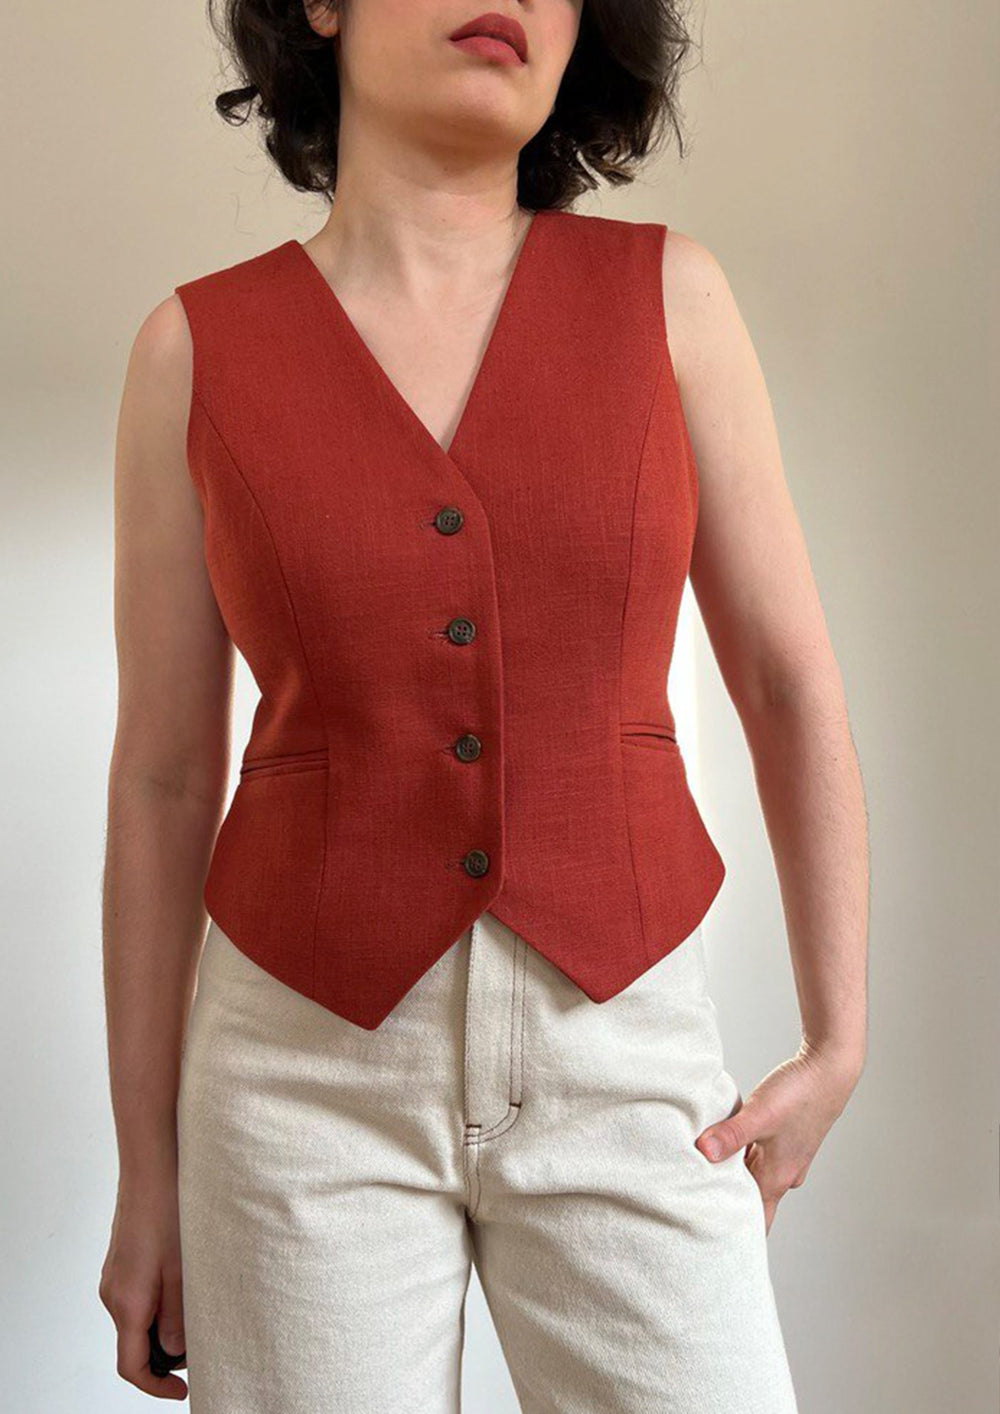 Woman wearing the Bennie Vest sewing pattern from Bella Loves Patterns on The Fold Line. A waistcoat pattern made in suitings, crepes, linen, twill, natural and synthetic suiting, and gabardine fabrics, featuring a V-shaped front neckline, side slanted do